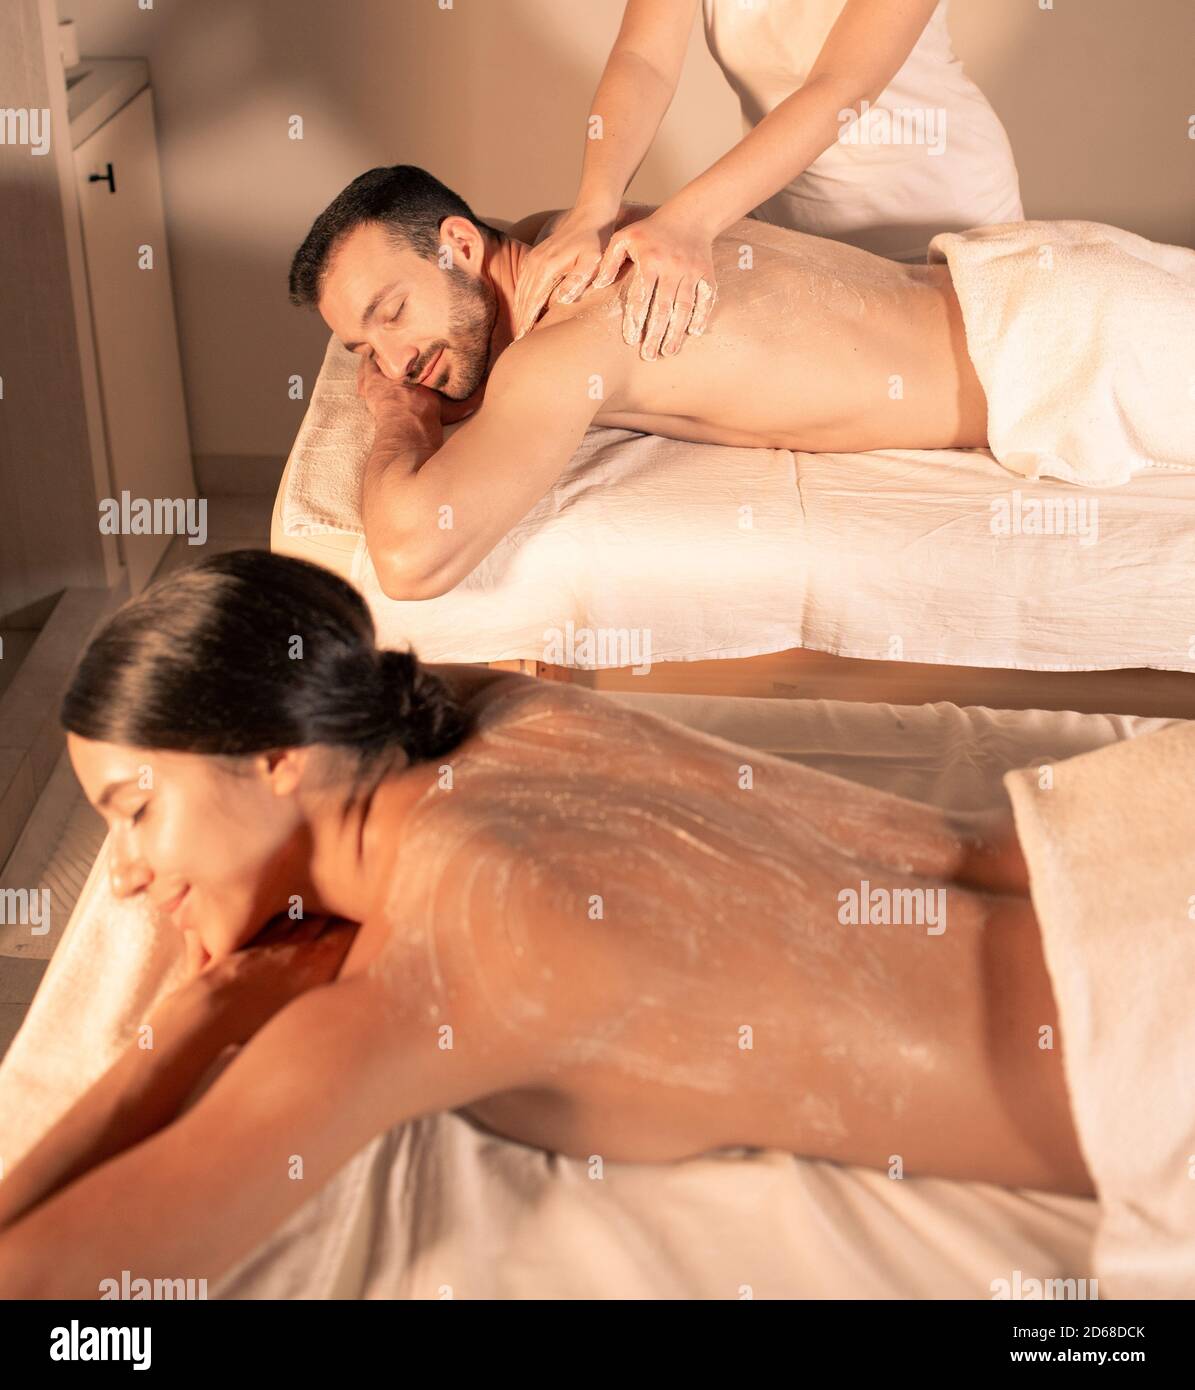 Exfoliate older skin with a body scrub. time for pampering body and skin at spa. Couple getting peel procedure after body massage. Stock Photo